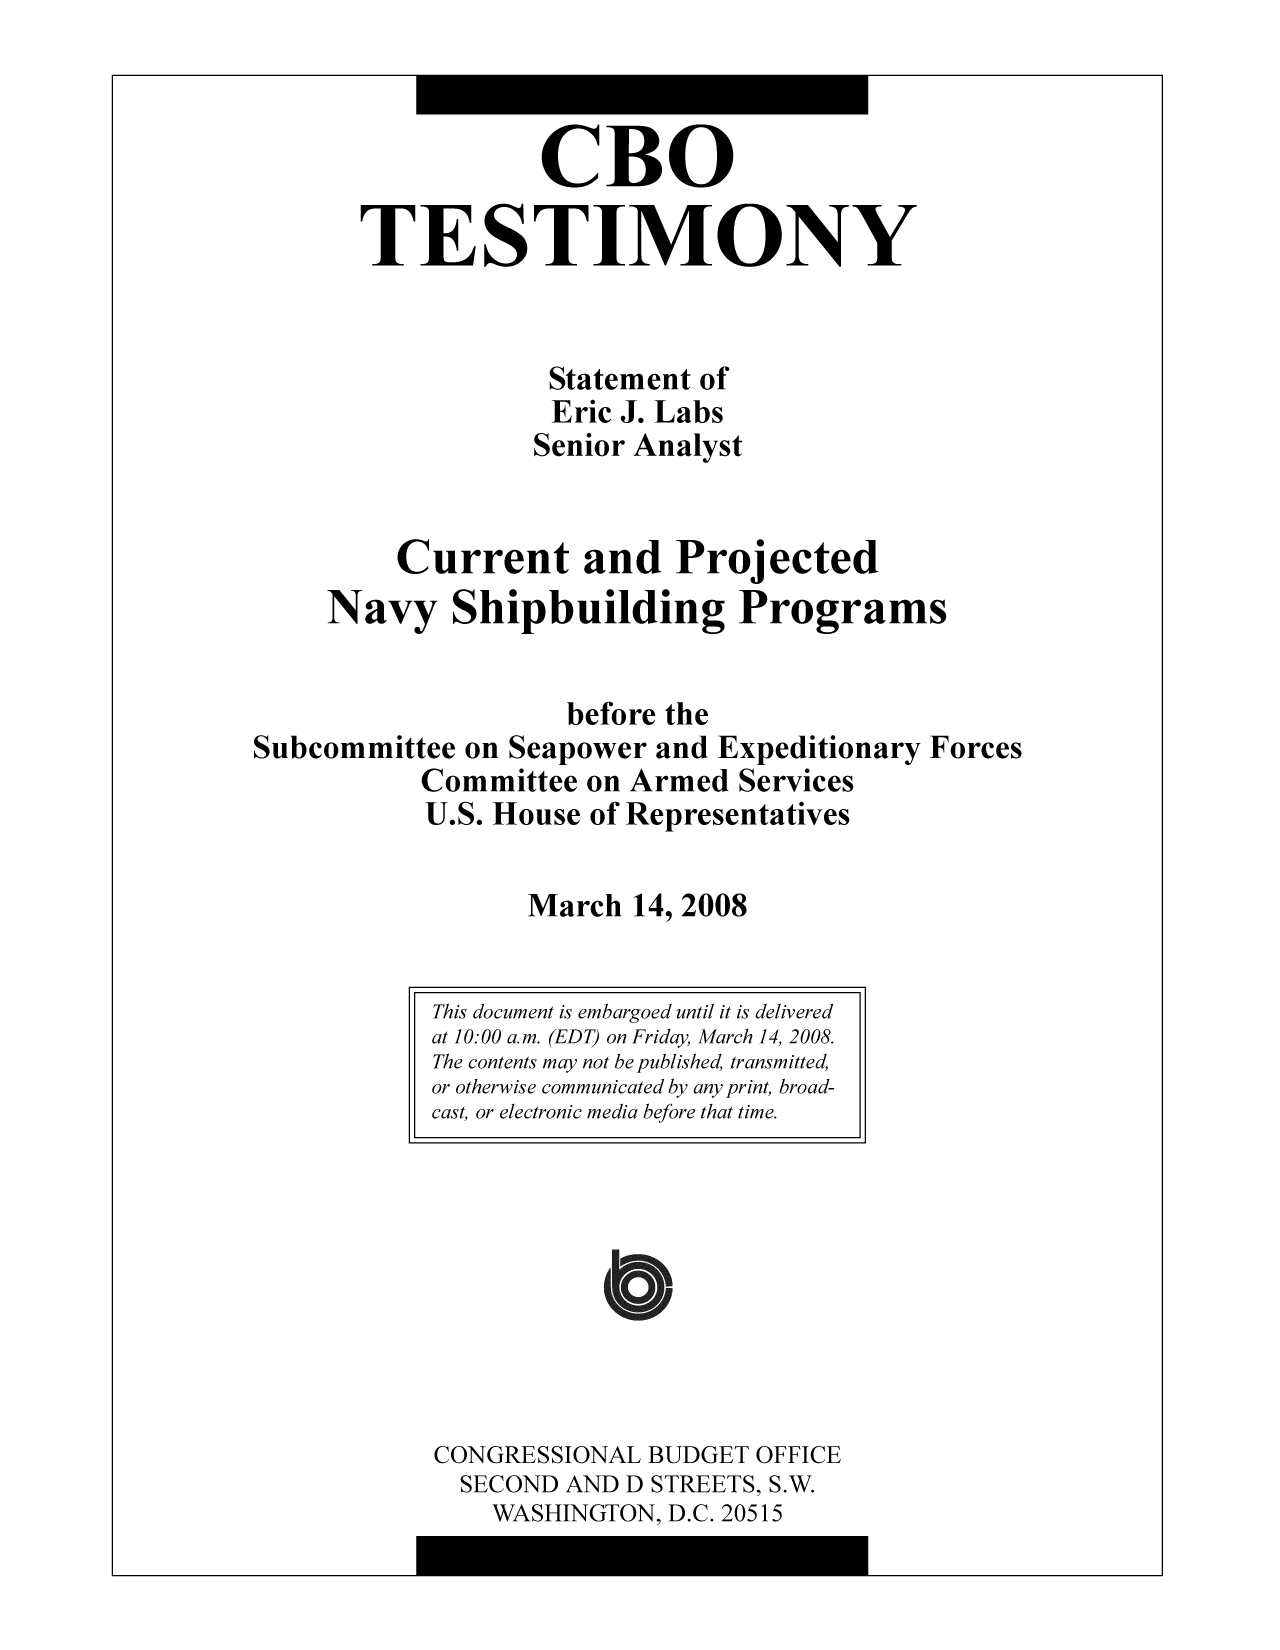 handle is hein.congrec/cbo9879 and id is 1 raw text is: CBO
TESTIMONY
Statement of
Eric J. Labs
Senior Analyst
Current and Projected
Navy Shipbuilding Programs
before the
Subcommittee on Seapower and Expeditionary Forces
Committee on Armed Services
U.S. House of Representatives
March 14, 2008

CONGRESSIONAL BUDGET OFFICE
SECOND AND D STREETS, S.W.
WASHINGTON, D.C. 20515

This document is embargoed until it is delivered
at 10:00 a.m. (EDT) on Friday, March 14, 2008.
The contents may not be published, transmitted,
or otherwise communicated by any print, broad-
cast, or electronic media before that time.


